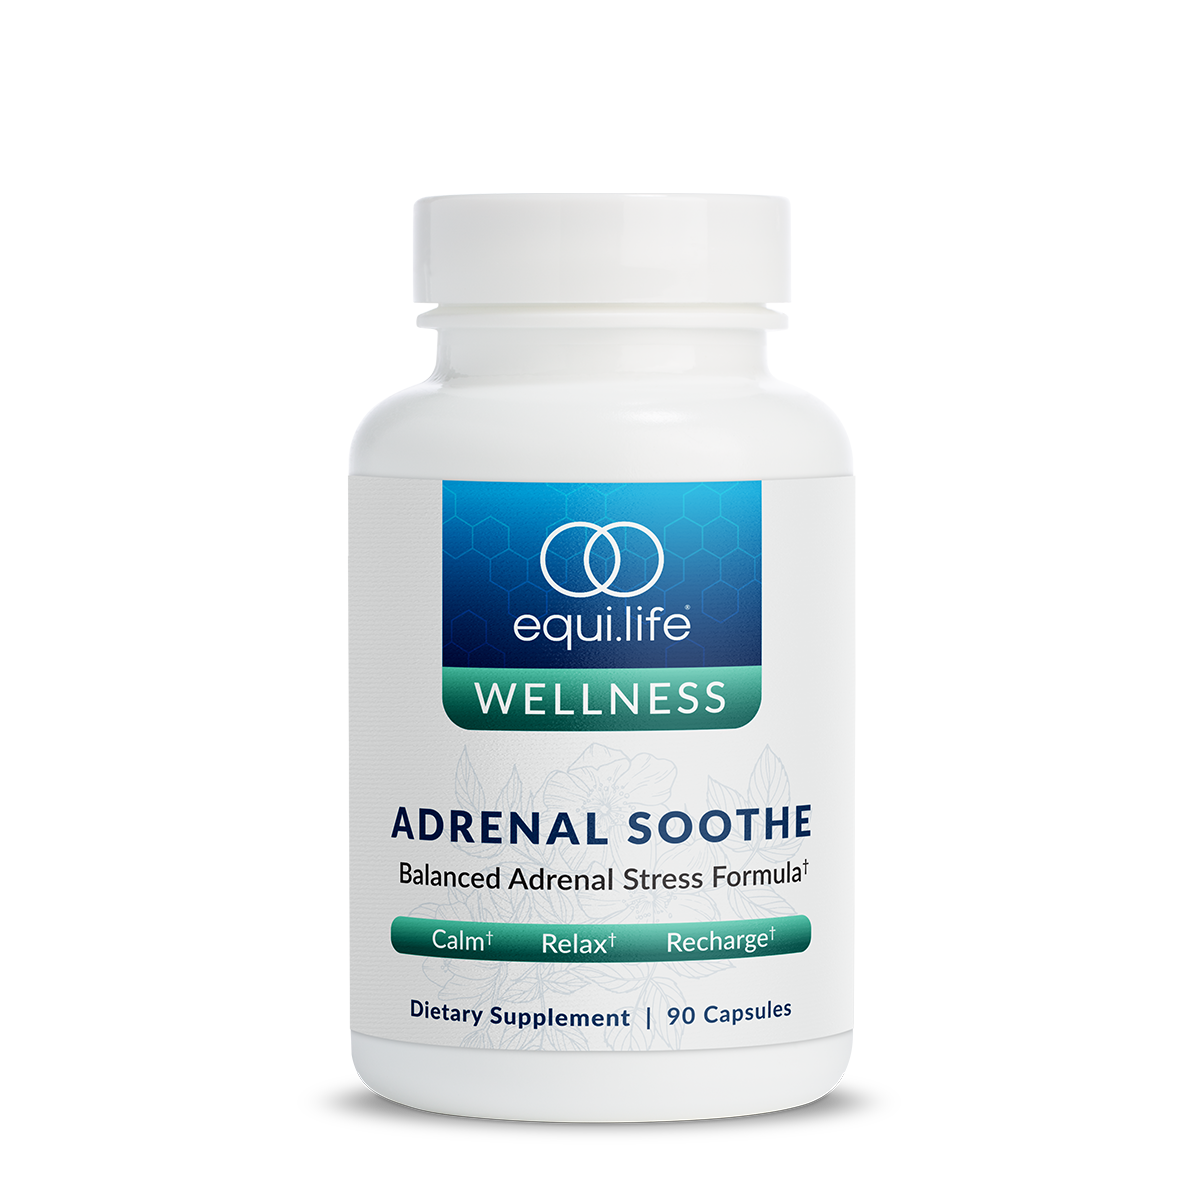 Adrenal Soothe